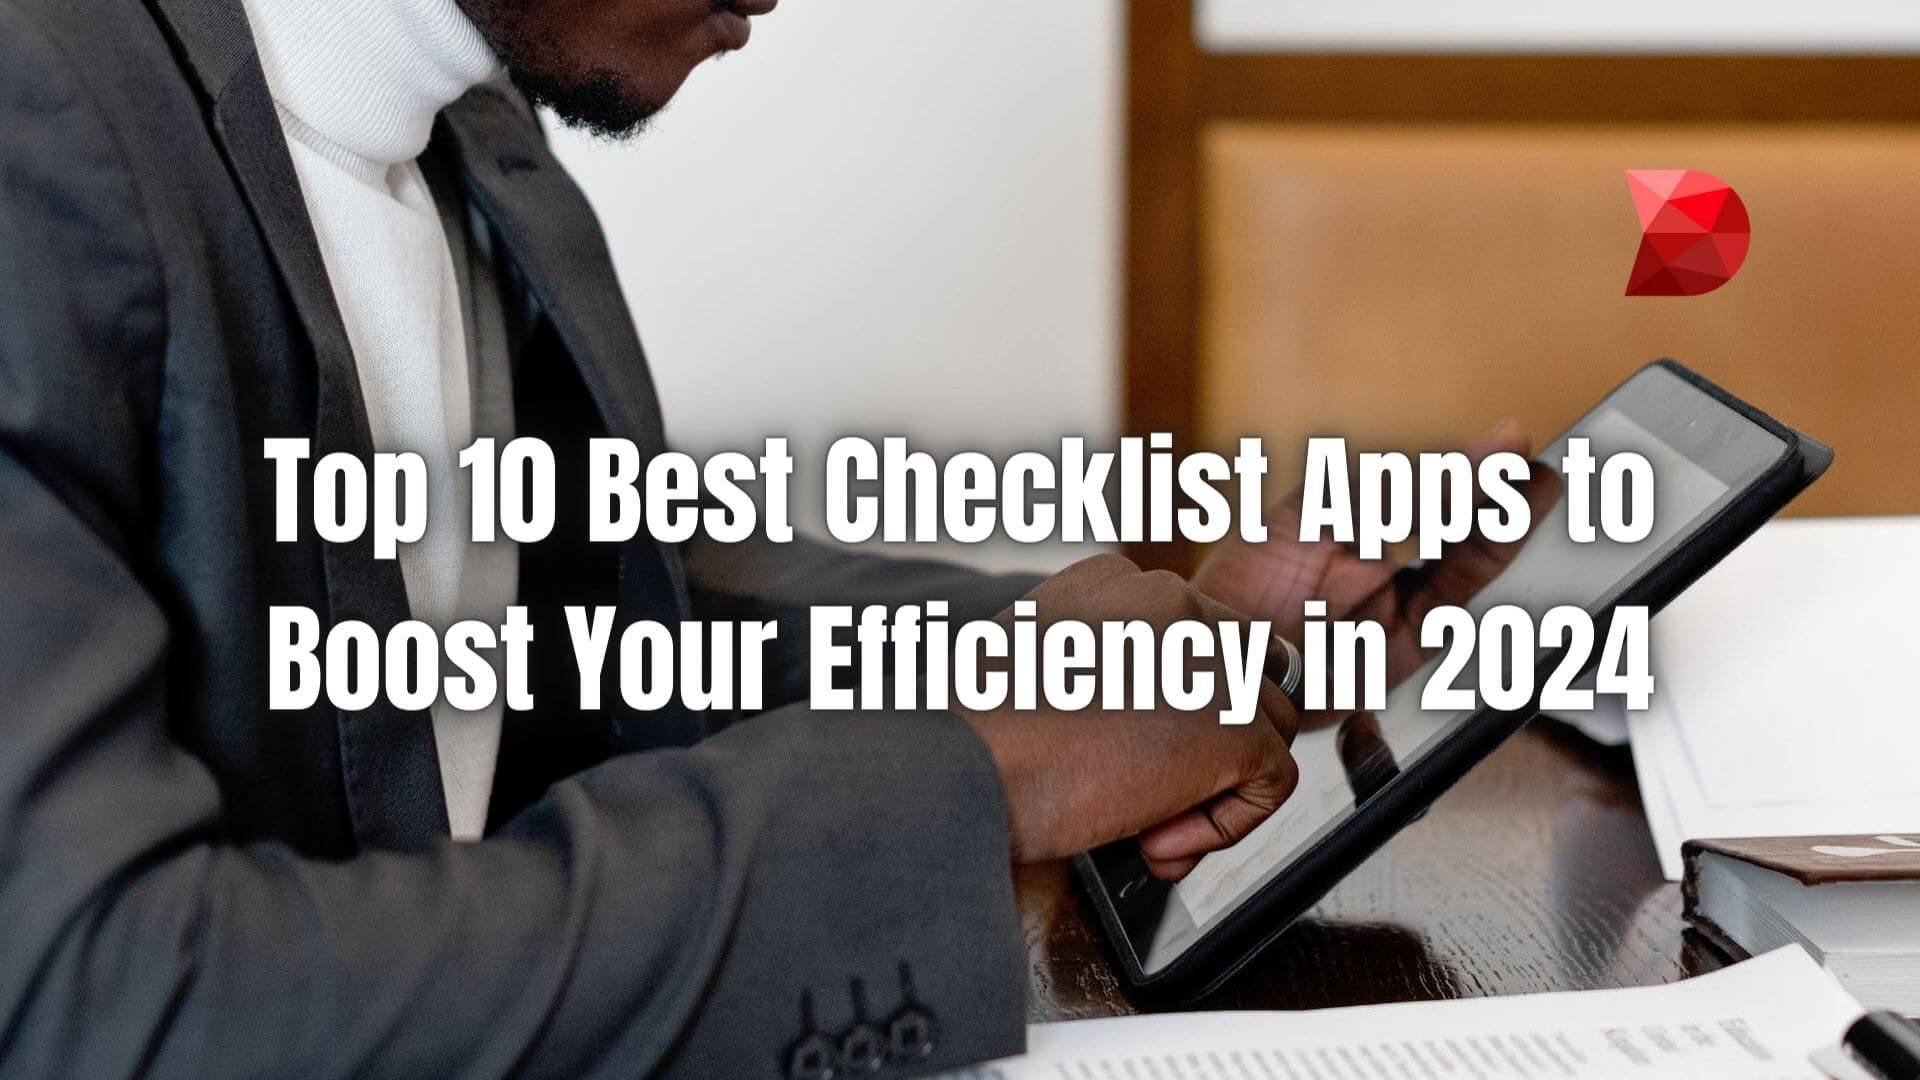 Stay ahead in 2024 with the ultimate checklist apps! Click here to unveil the top 10 tools to supercharge your efficiency and productivity.